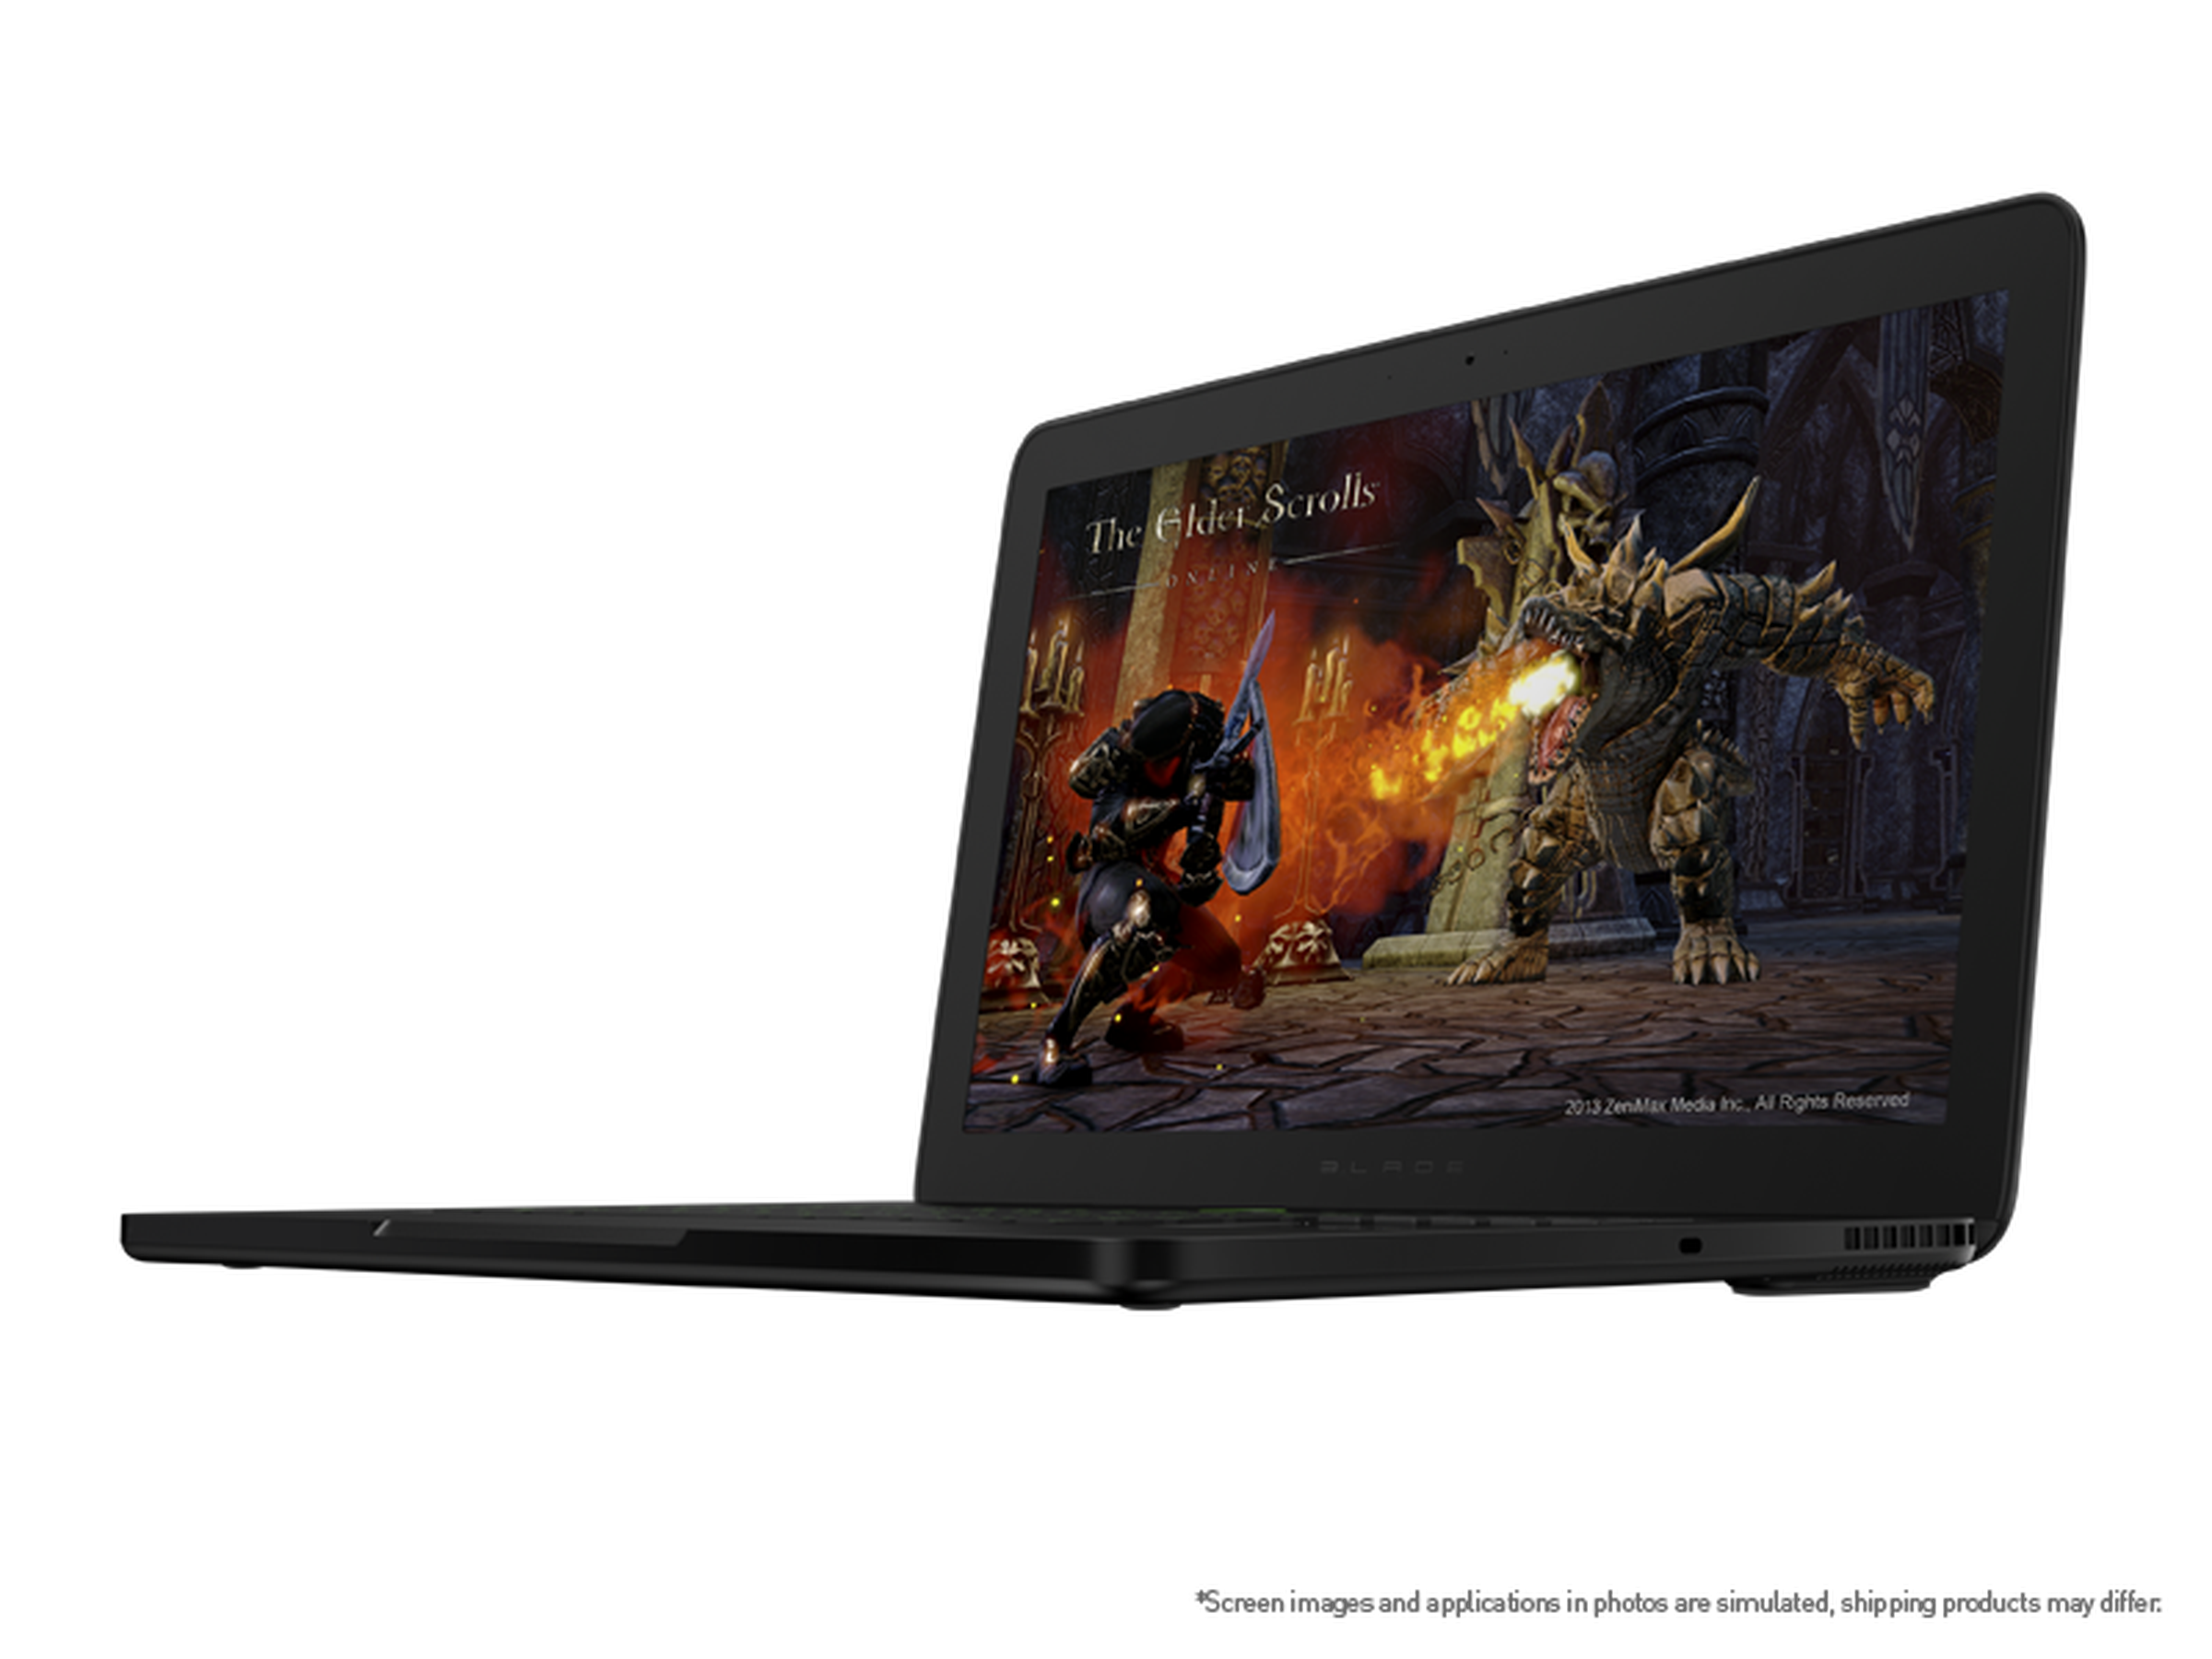 Razer Blade and Blade Pro pictures